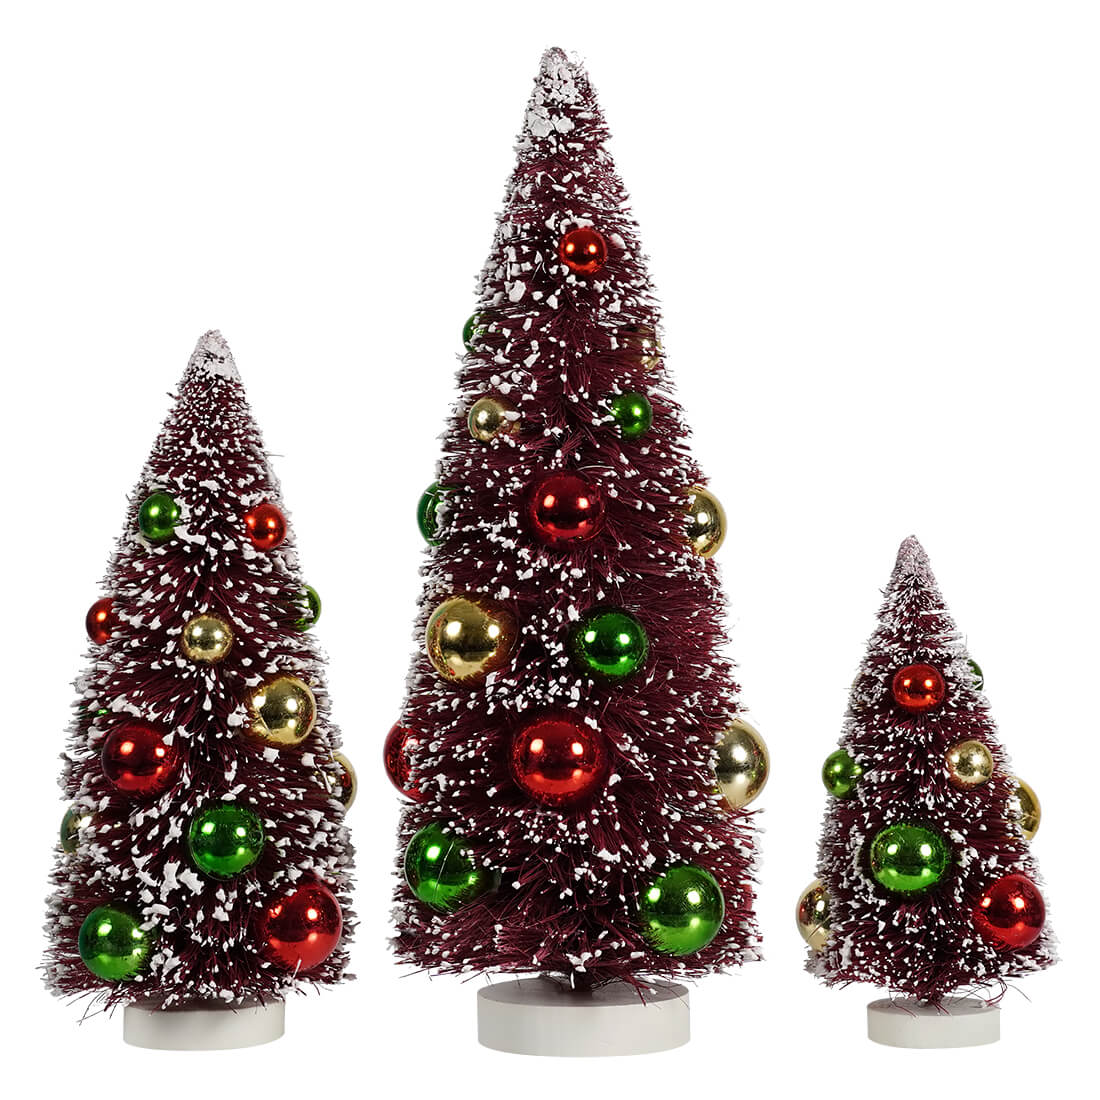 Frosted Burgundy Bottle Brush Trees with Ornaments Set/3